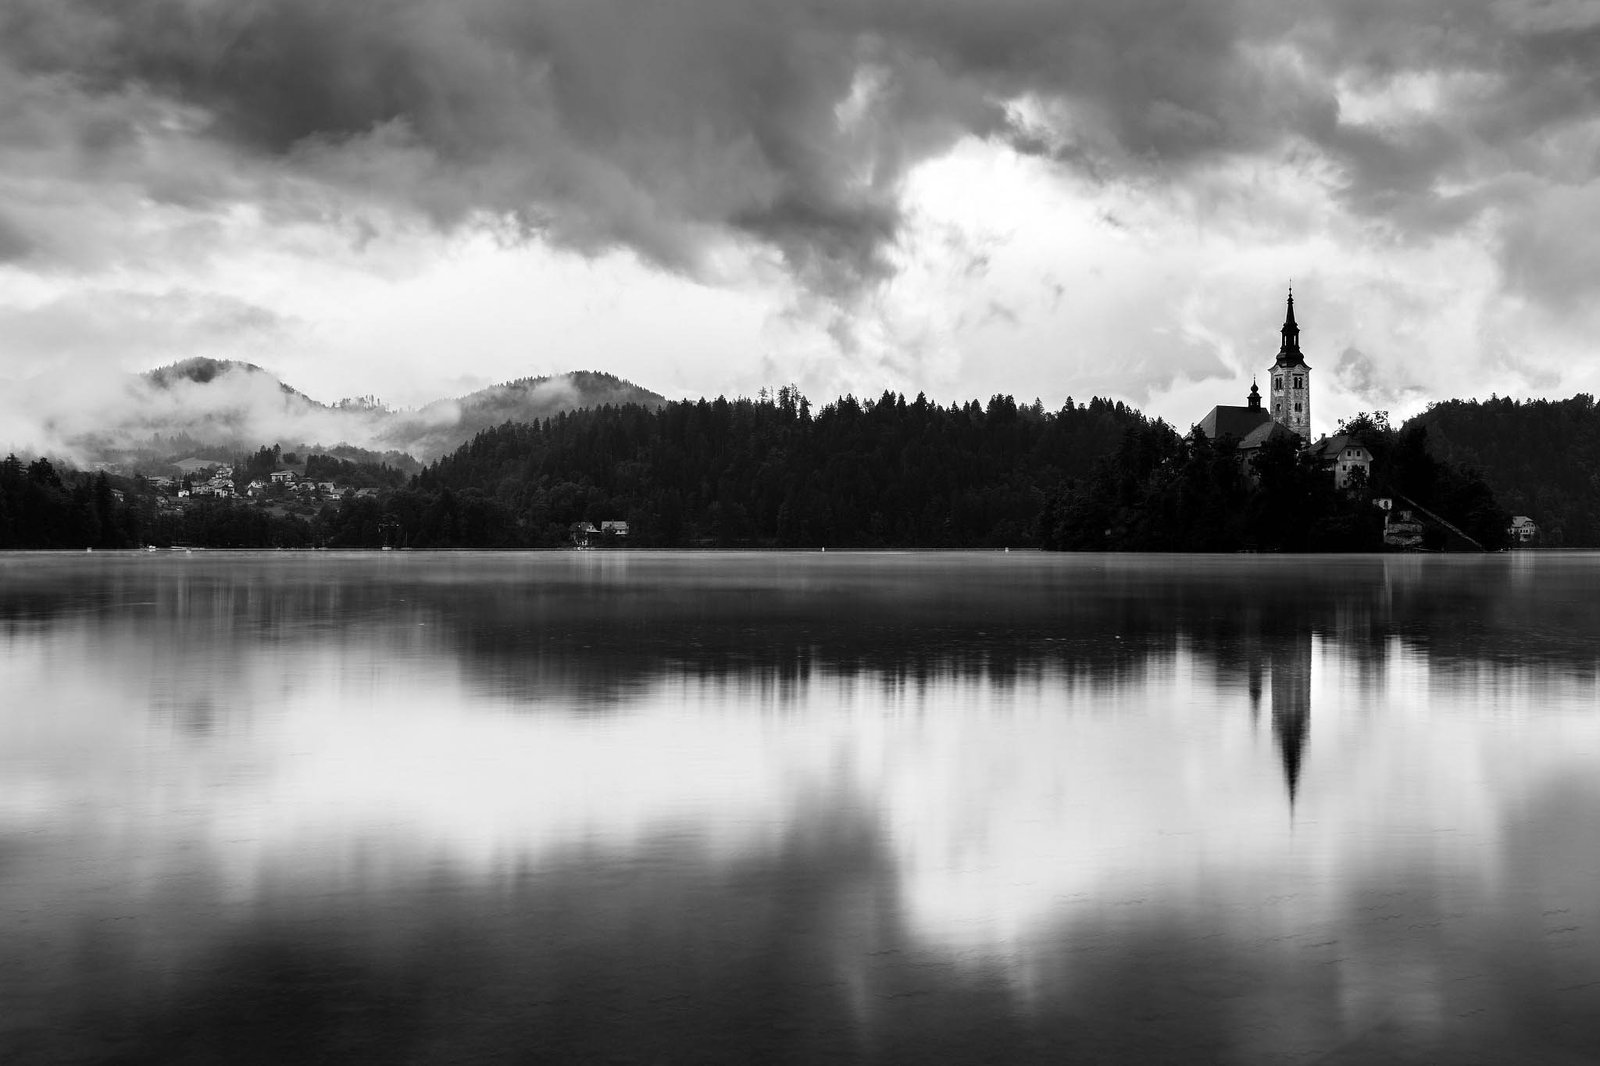 Morning at Lake Bled's island church of the assumption of saint mary after a night of heavy summer rain, Slovenia.